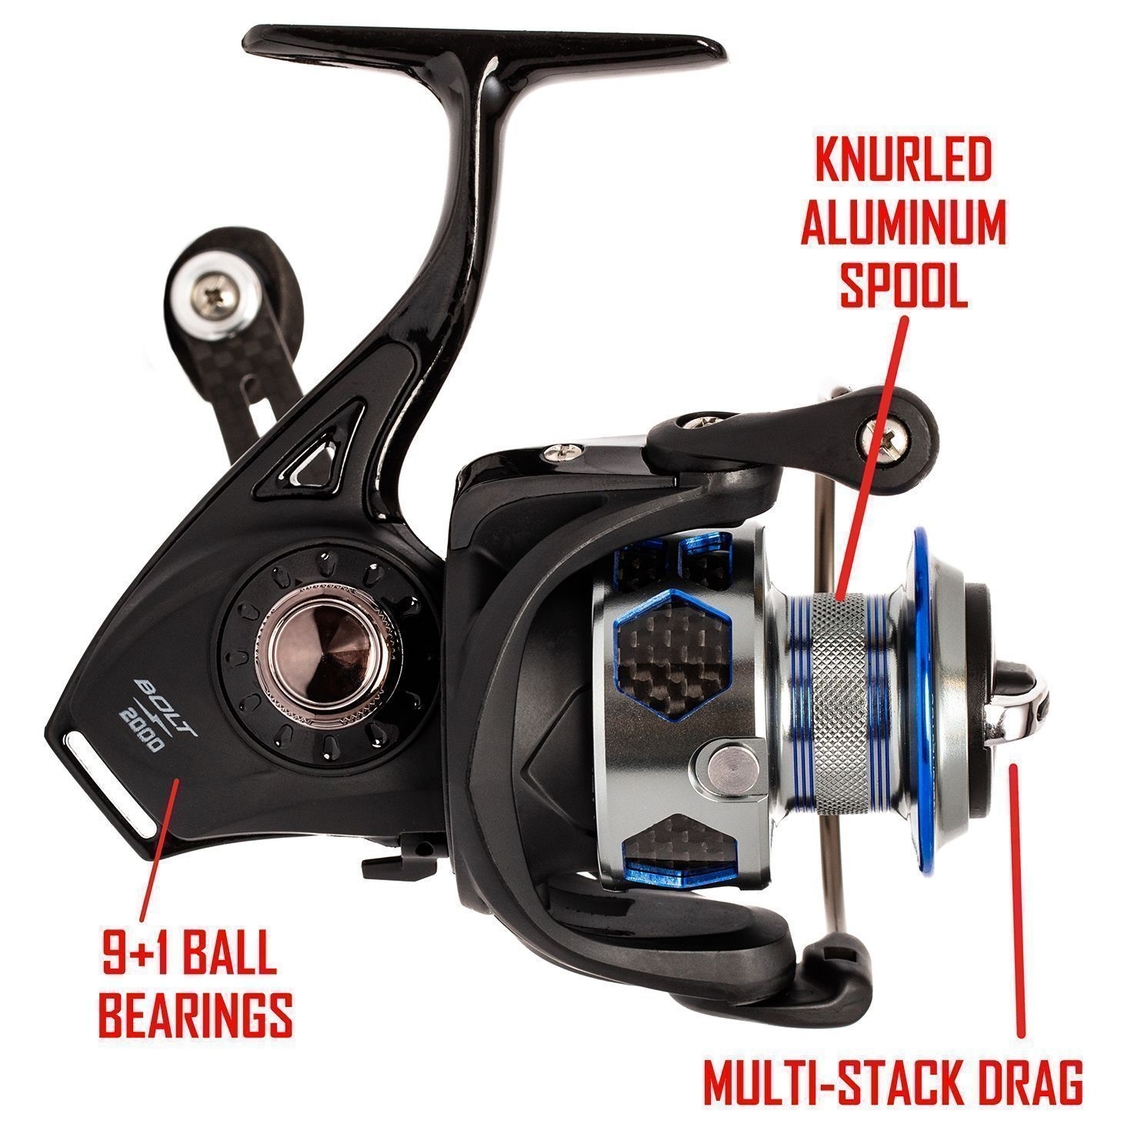 Ardent BOLT Spinning Reel - 1000 size Left or Right Hand Interchangable Retrieve - Image 4 of 5